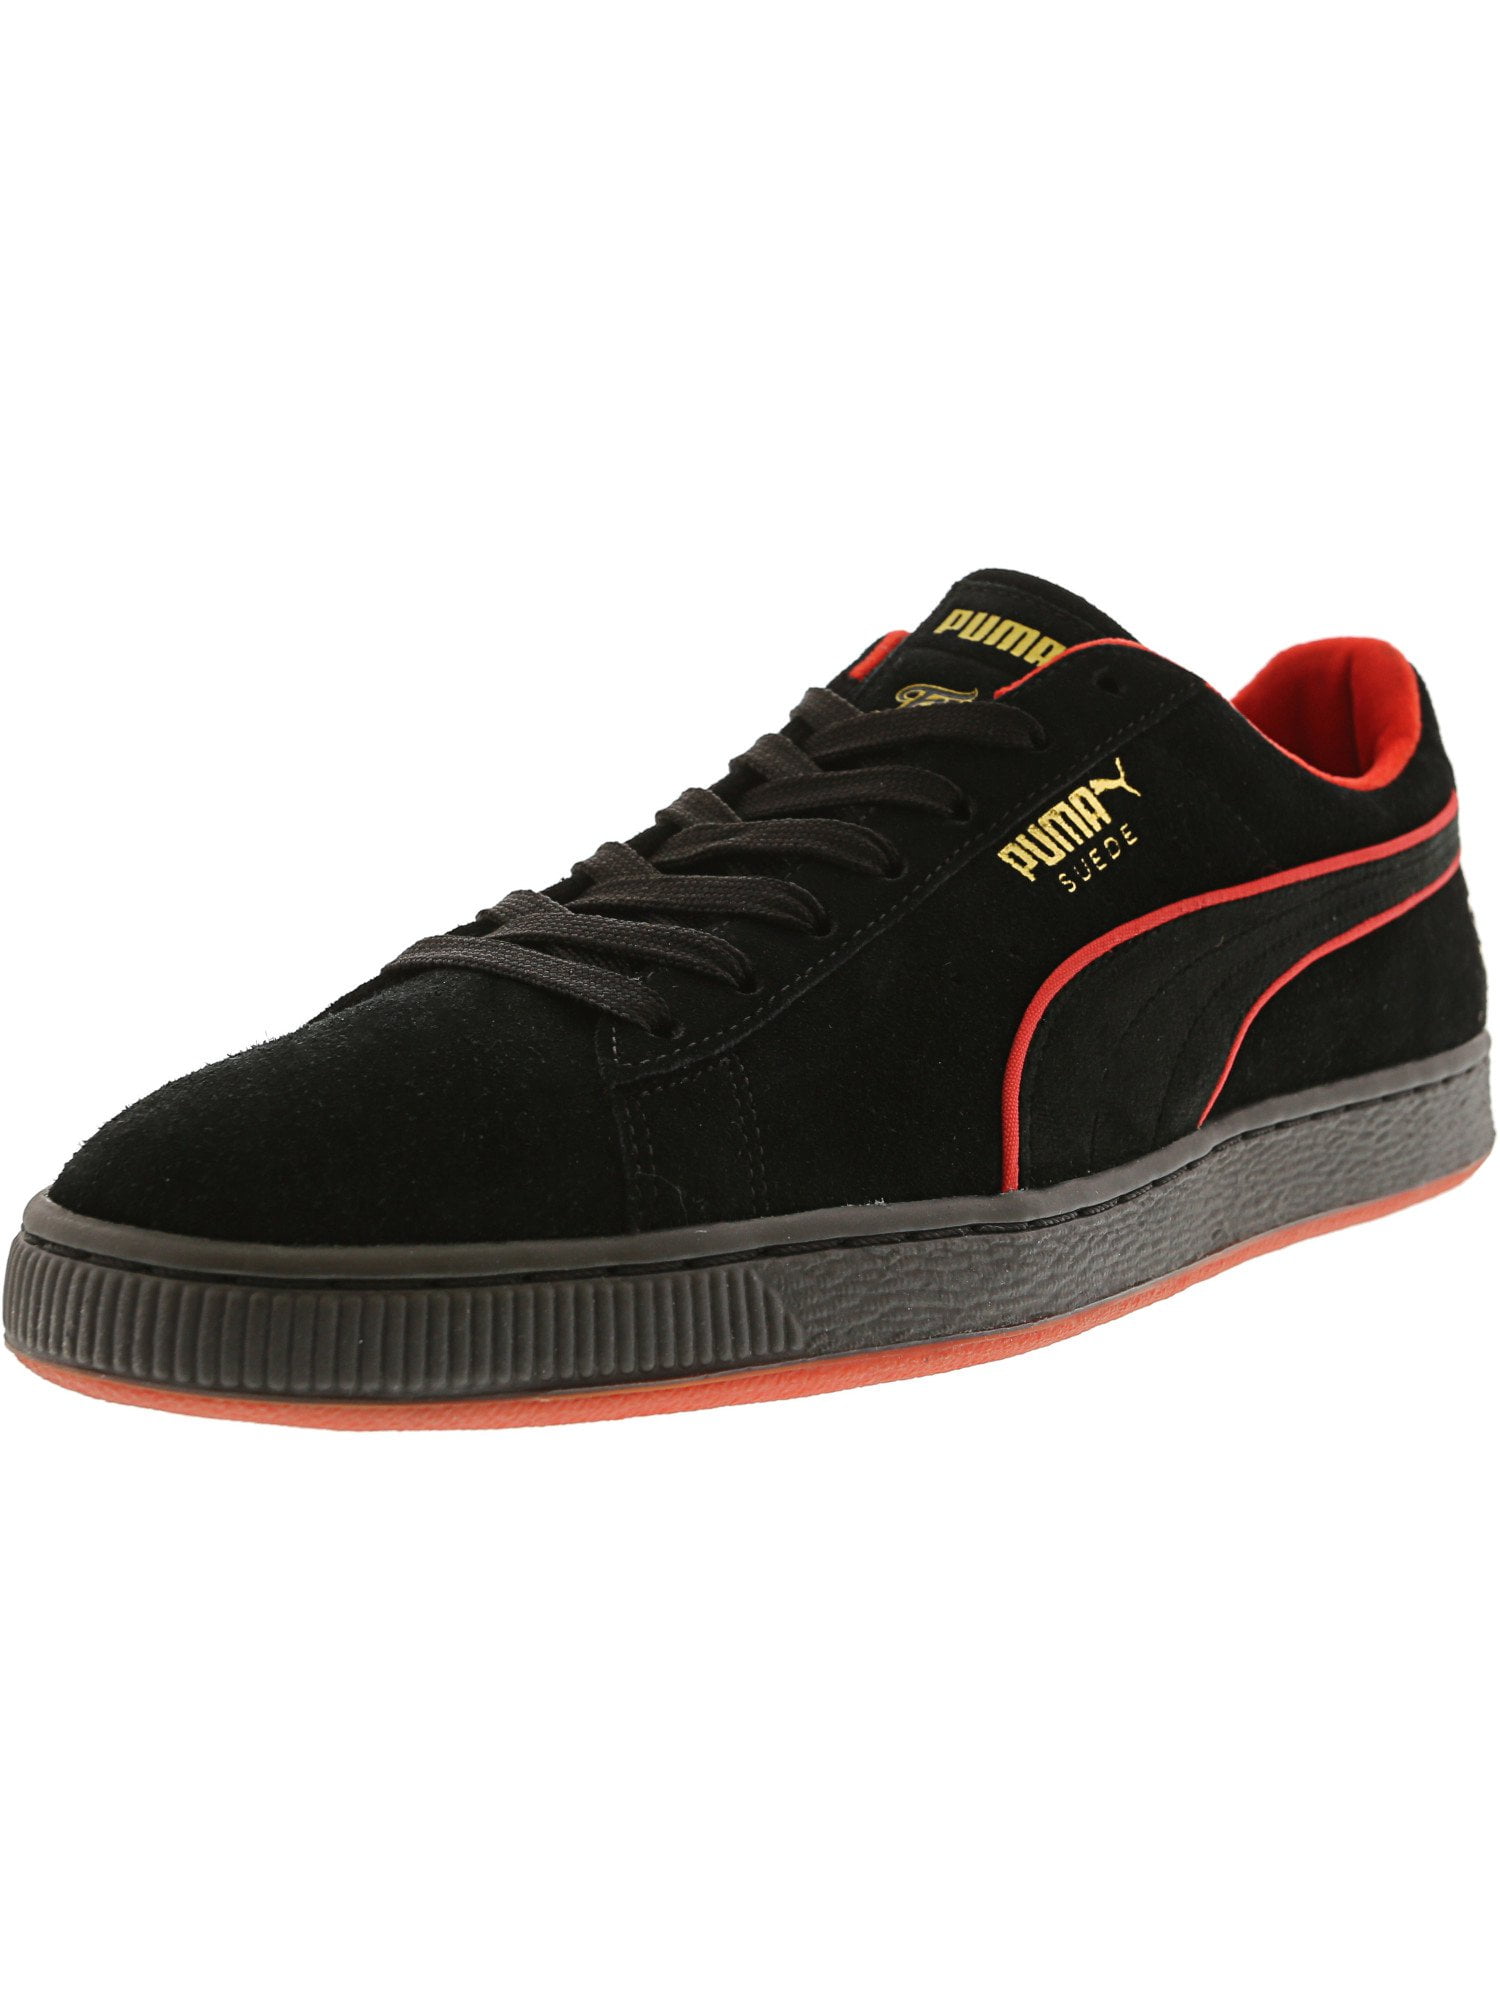 puma red ankle shoes